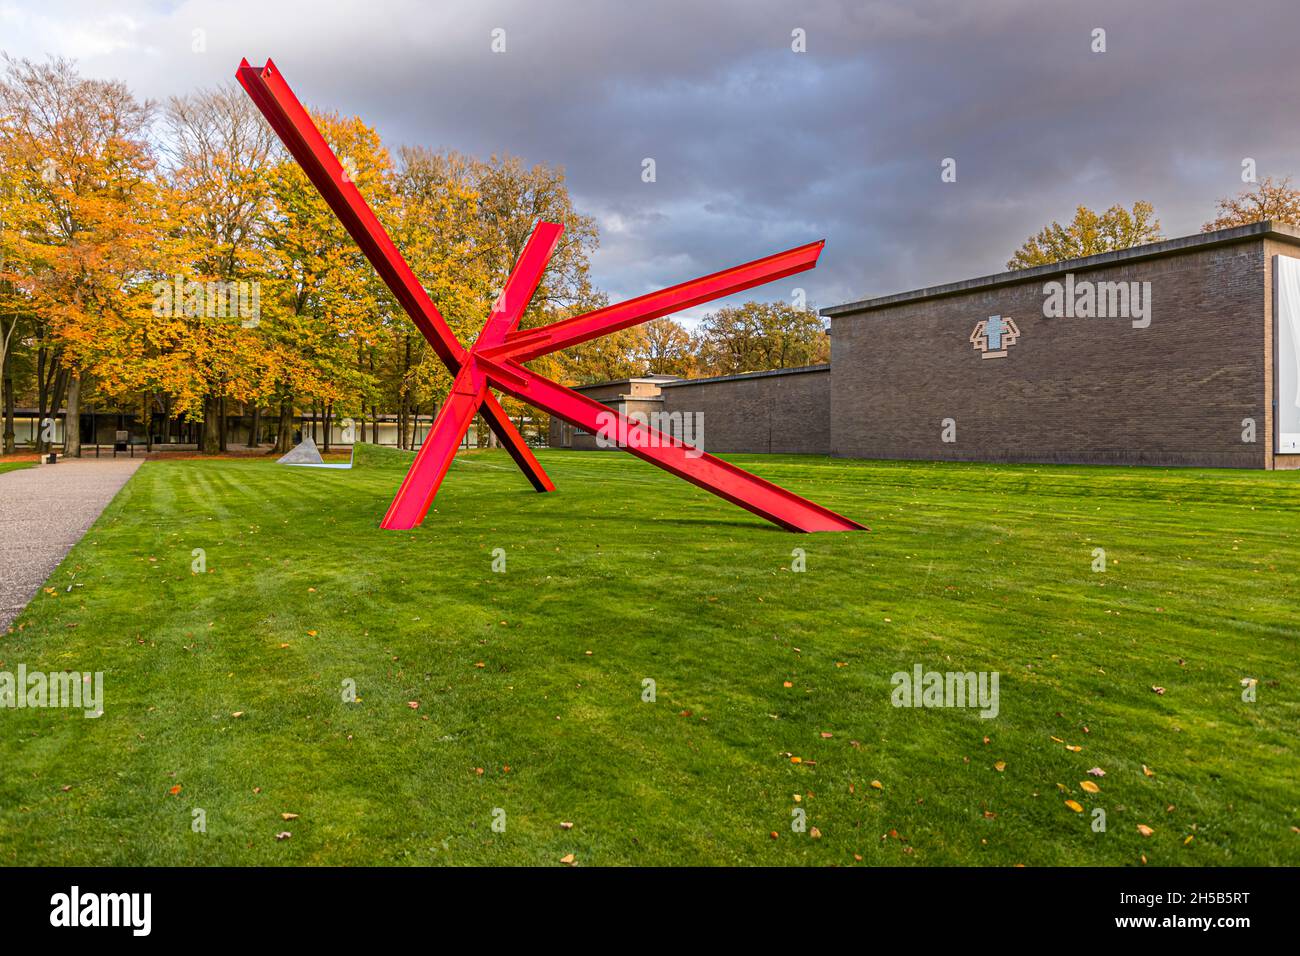 K-piece (1972) by Mark Di Suvero at Kröller-Müller Museum in Otterlo, Netherlands Stock Photo